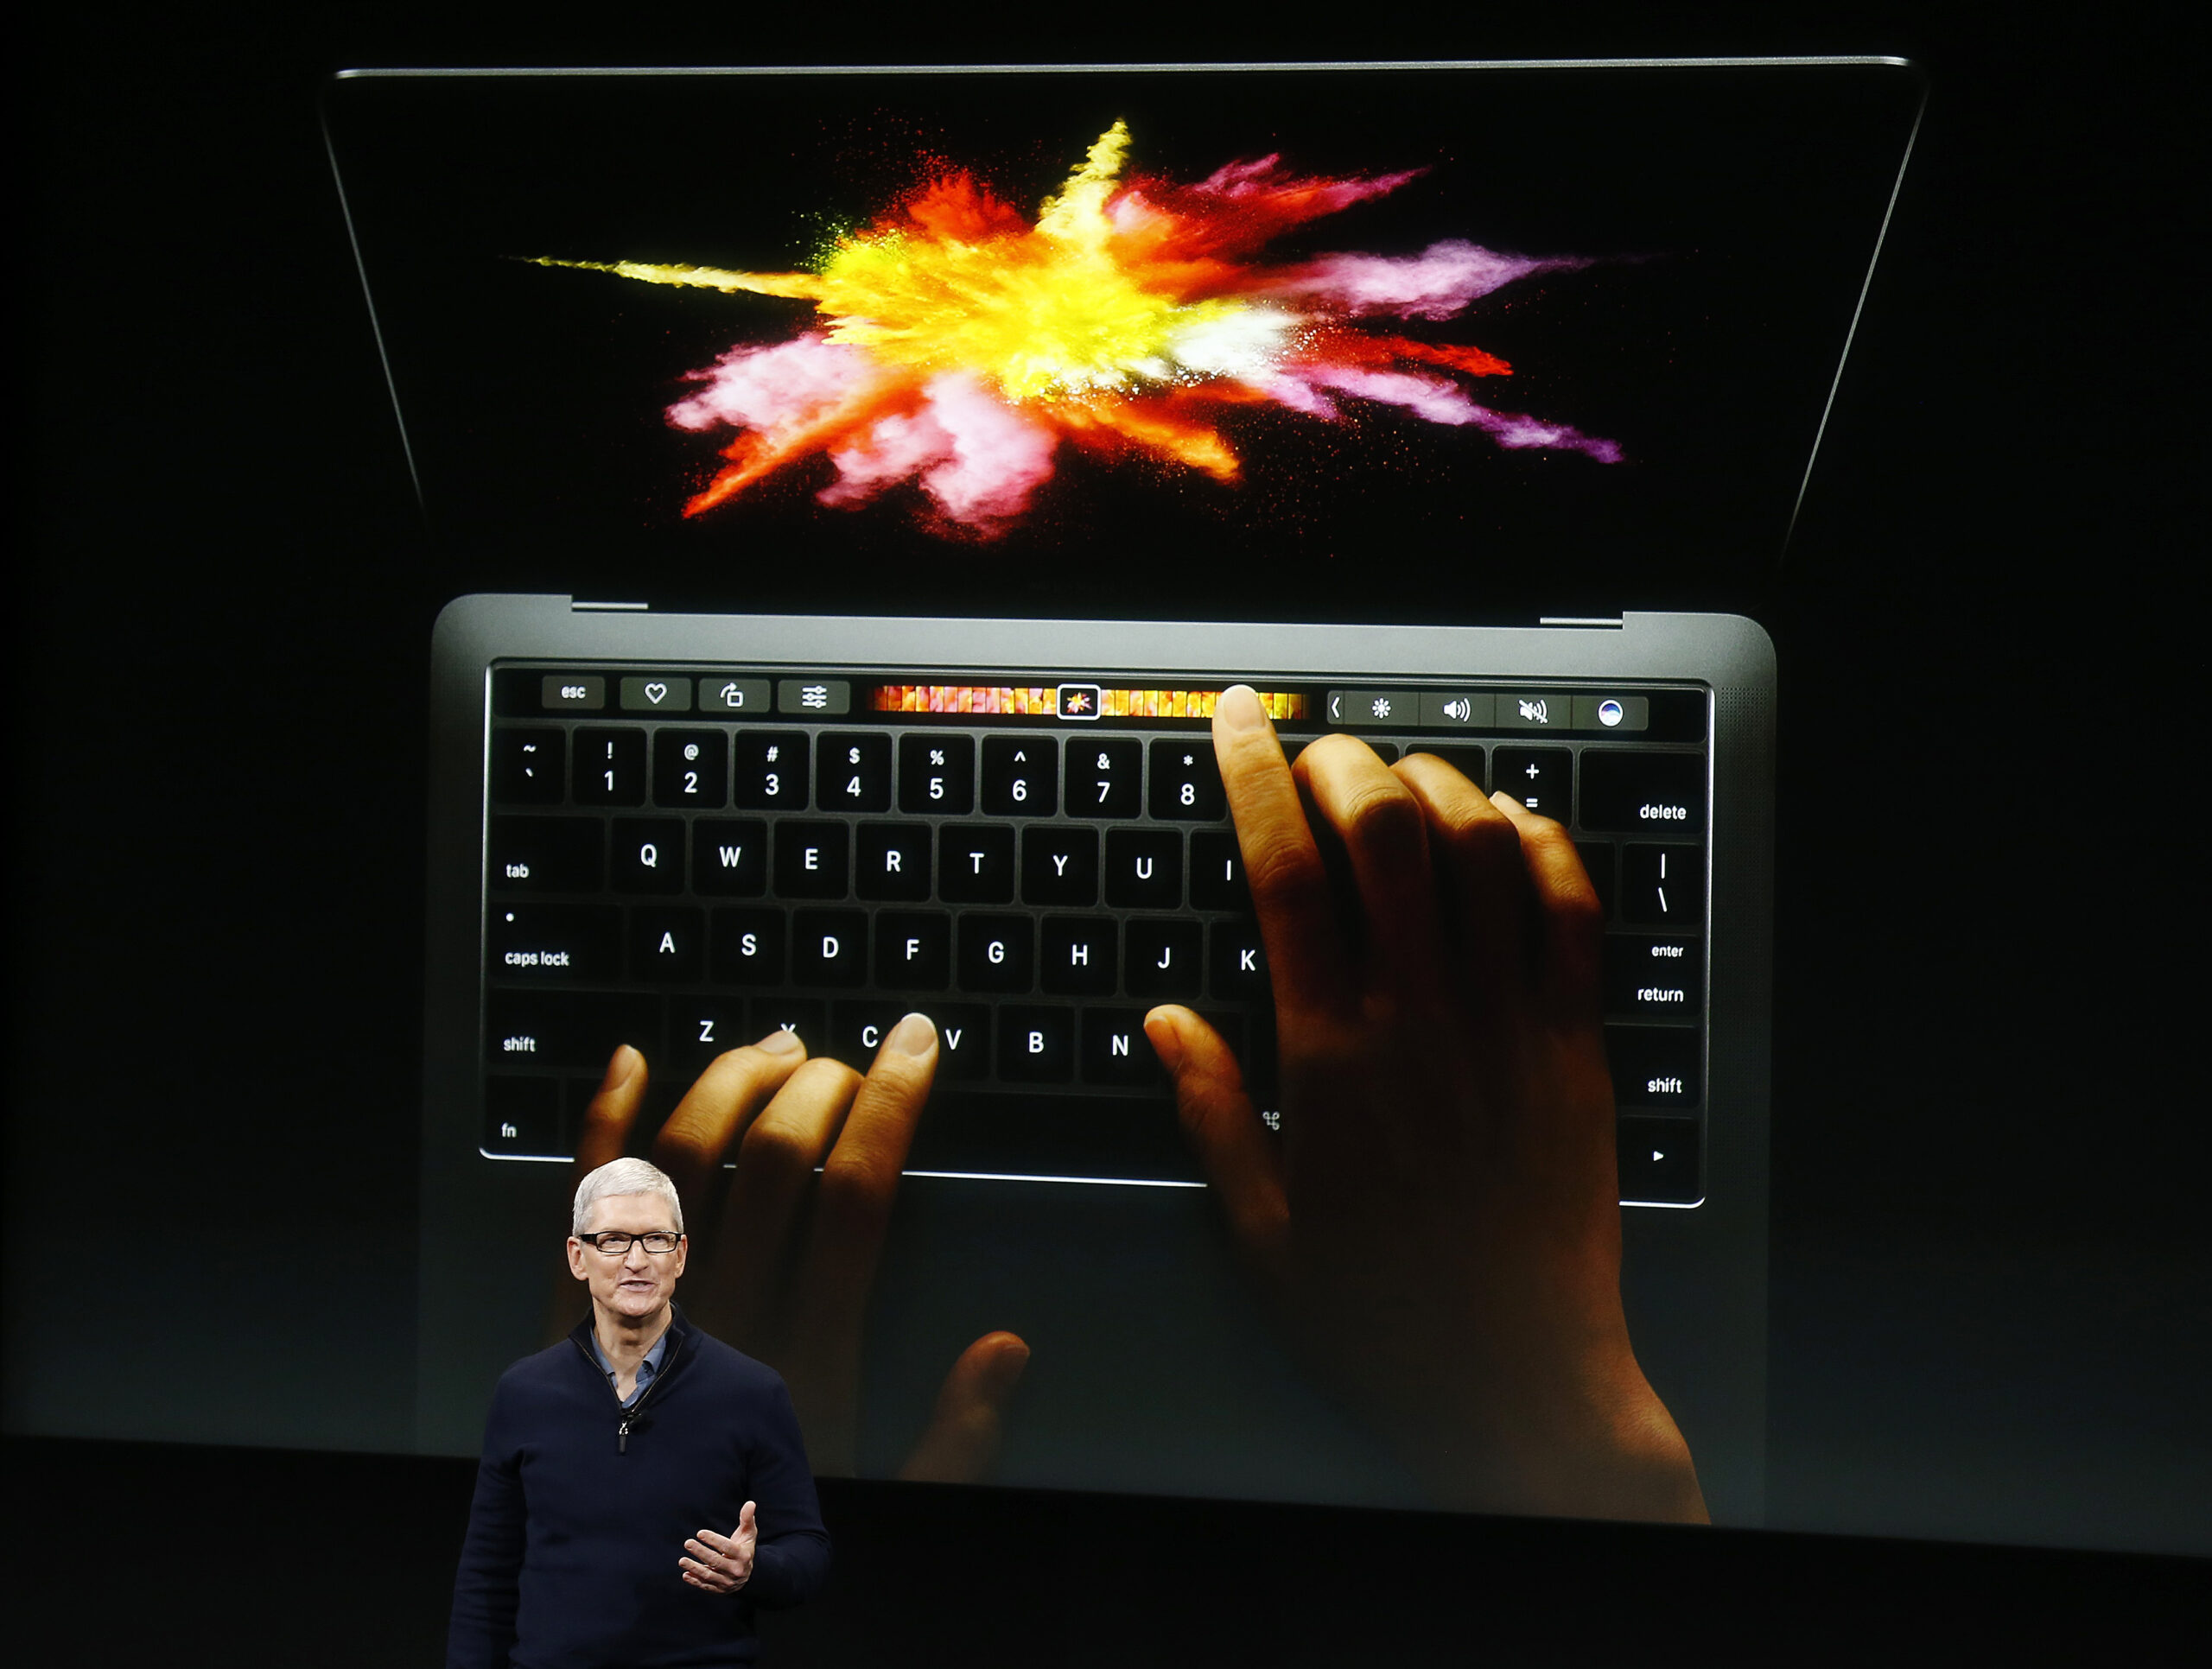 Apple CEO Tim Cook speaks under a graphic of the new MacBook Pro during an Apple media event in Cupertino, California, US on October 27, 2016. REUTERS/Beck Diefenbach TPX Photos of the Day